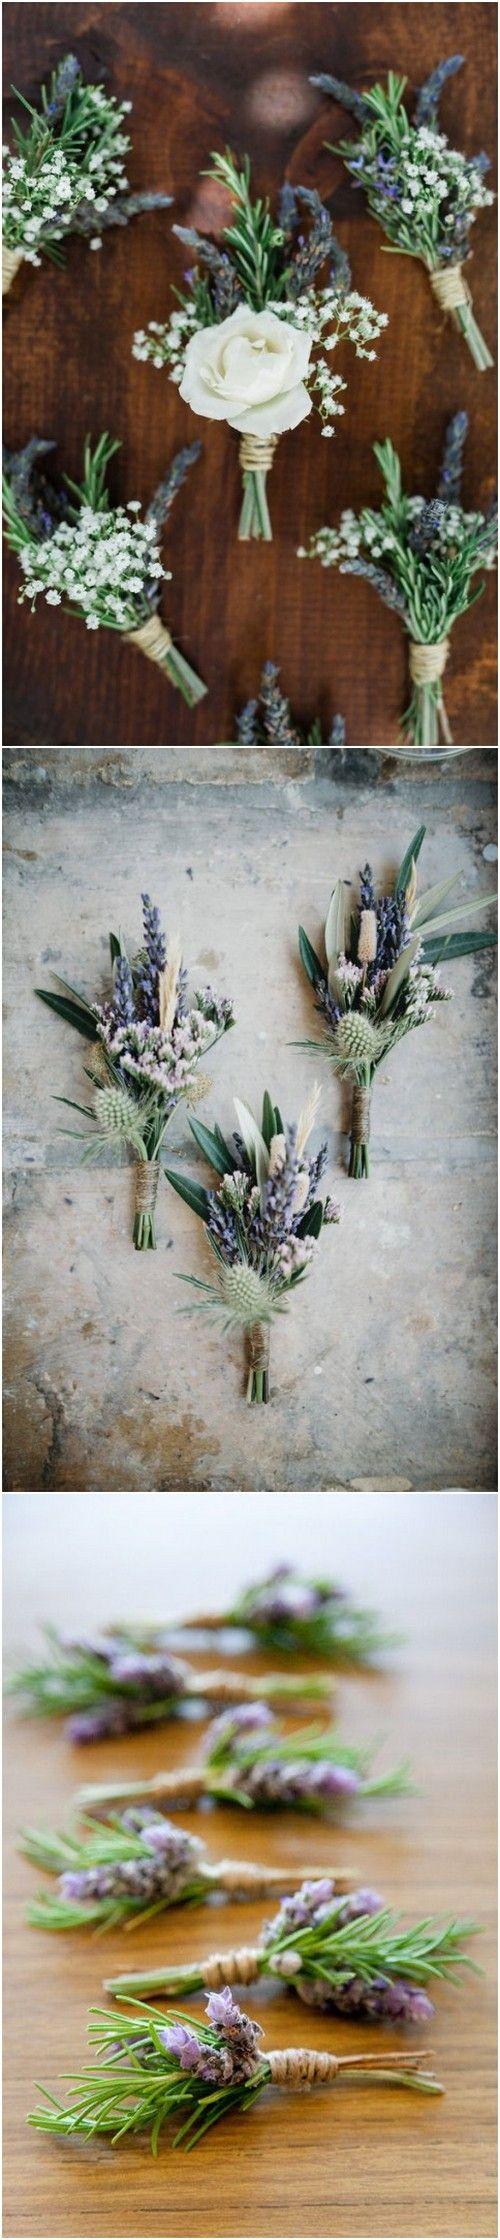 Hochzeit - Top 28 Stunning Lavender Wedding Ideas To Inspire Your Big Day - Page 2 Of 2